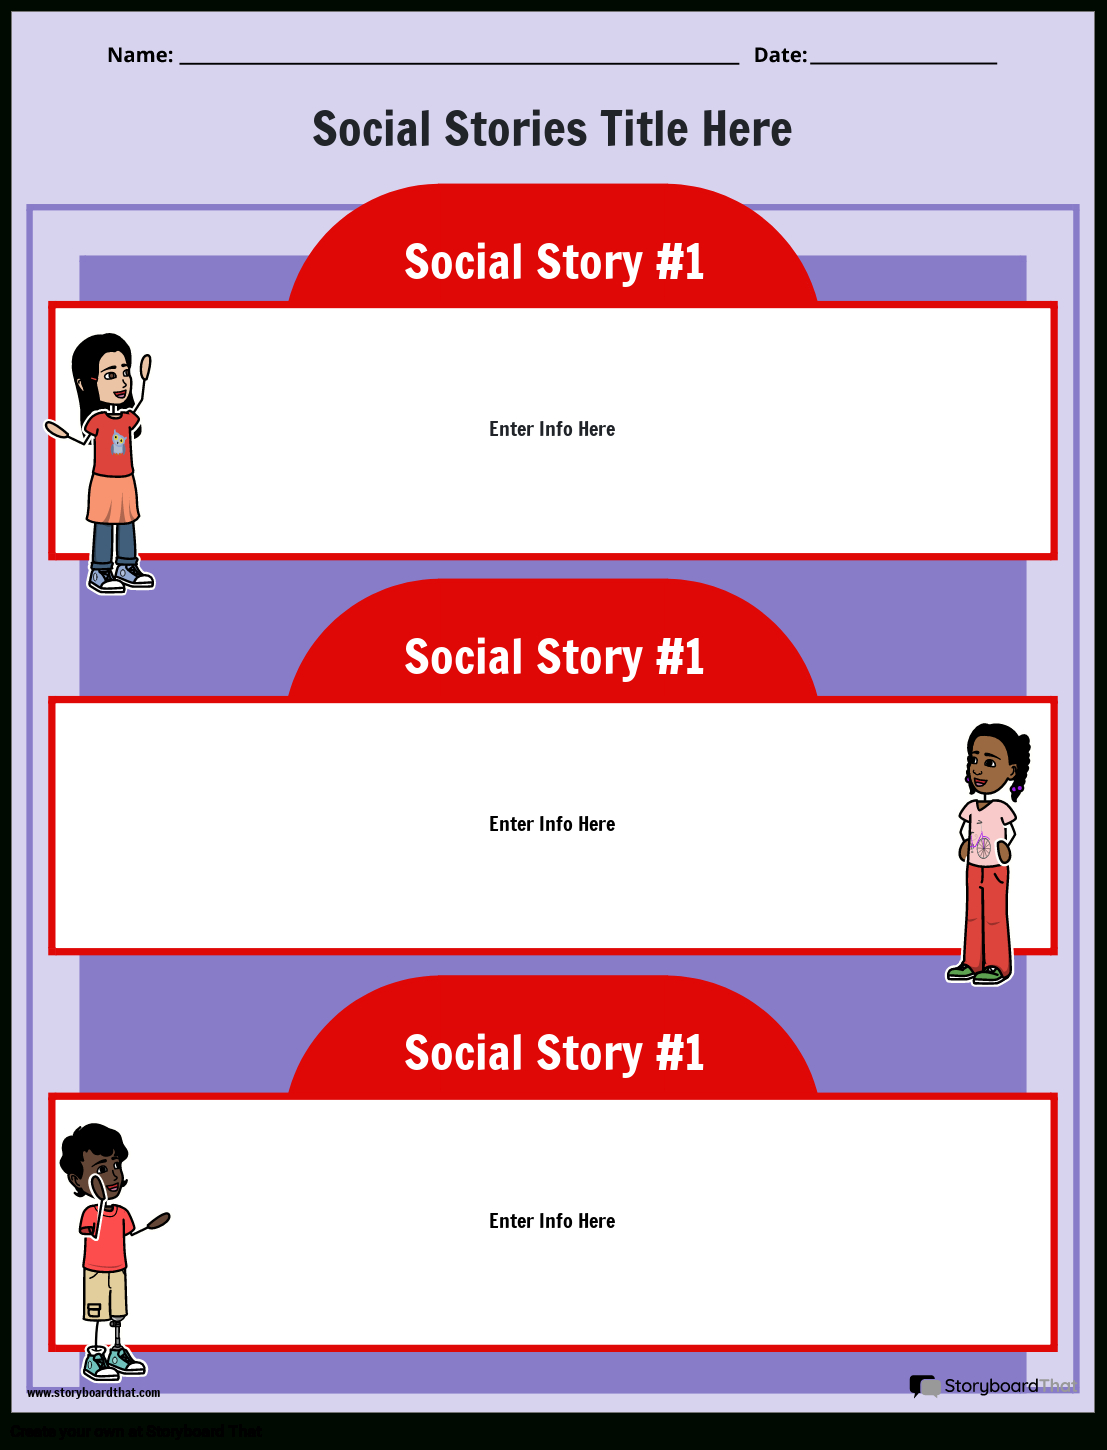 Create Custom Social Stories Templates | Free And Printable with regard to Free Printable Social Story Template